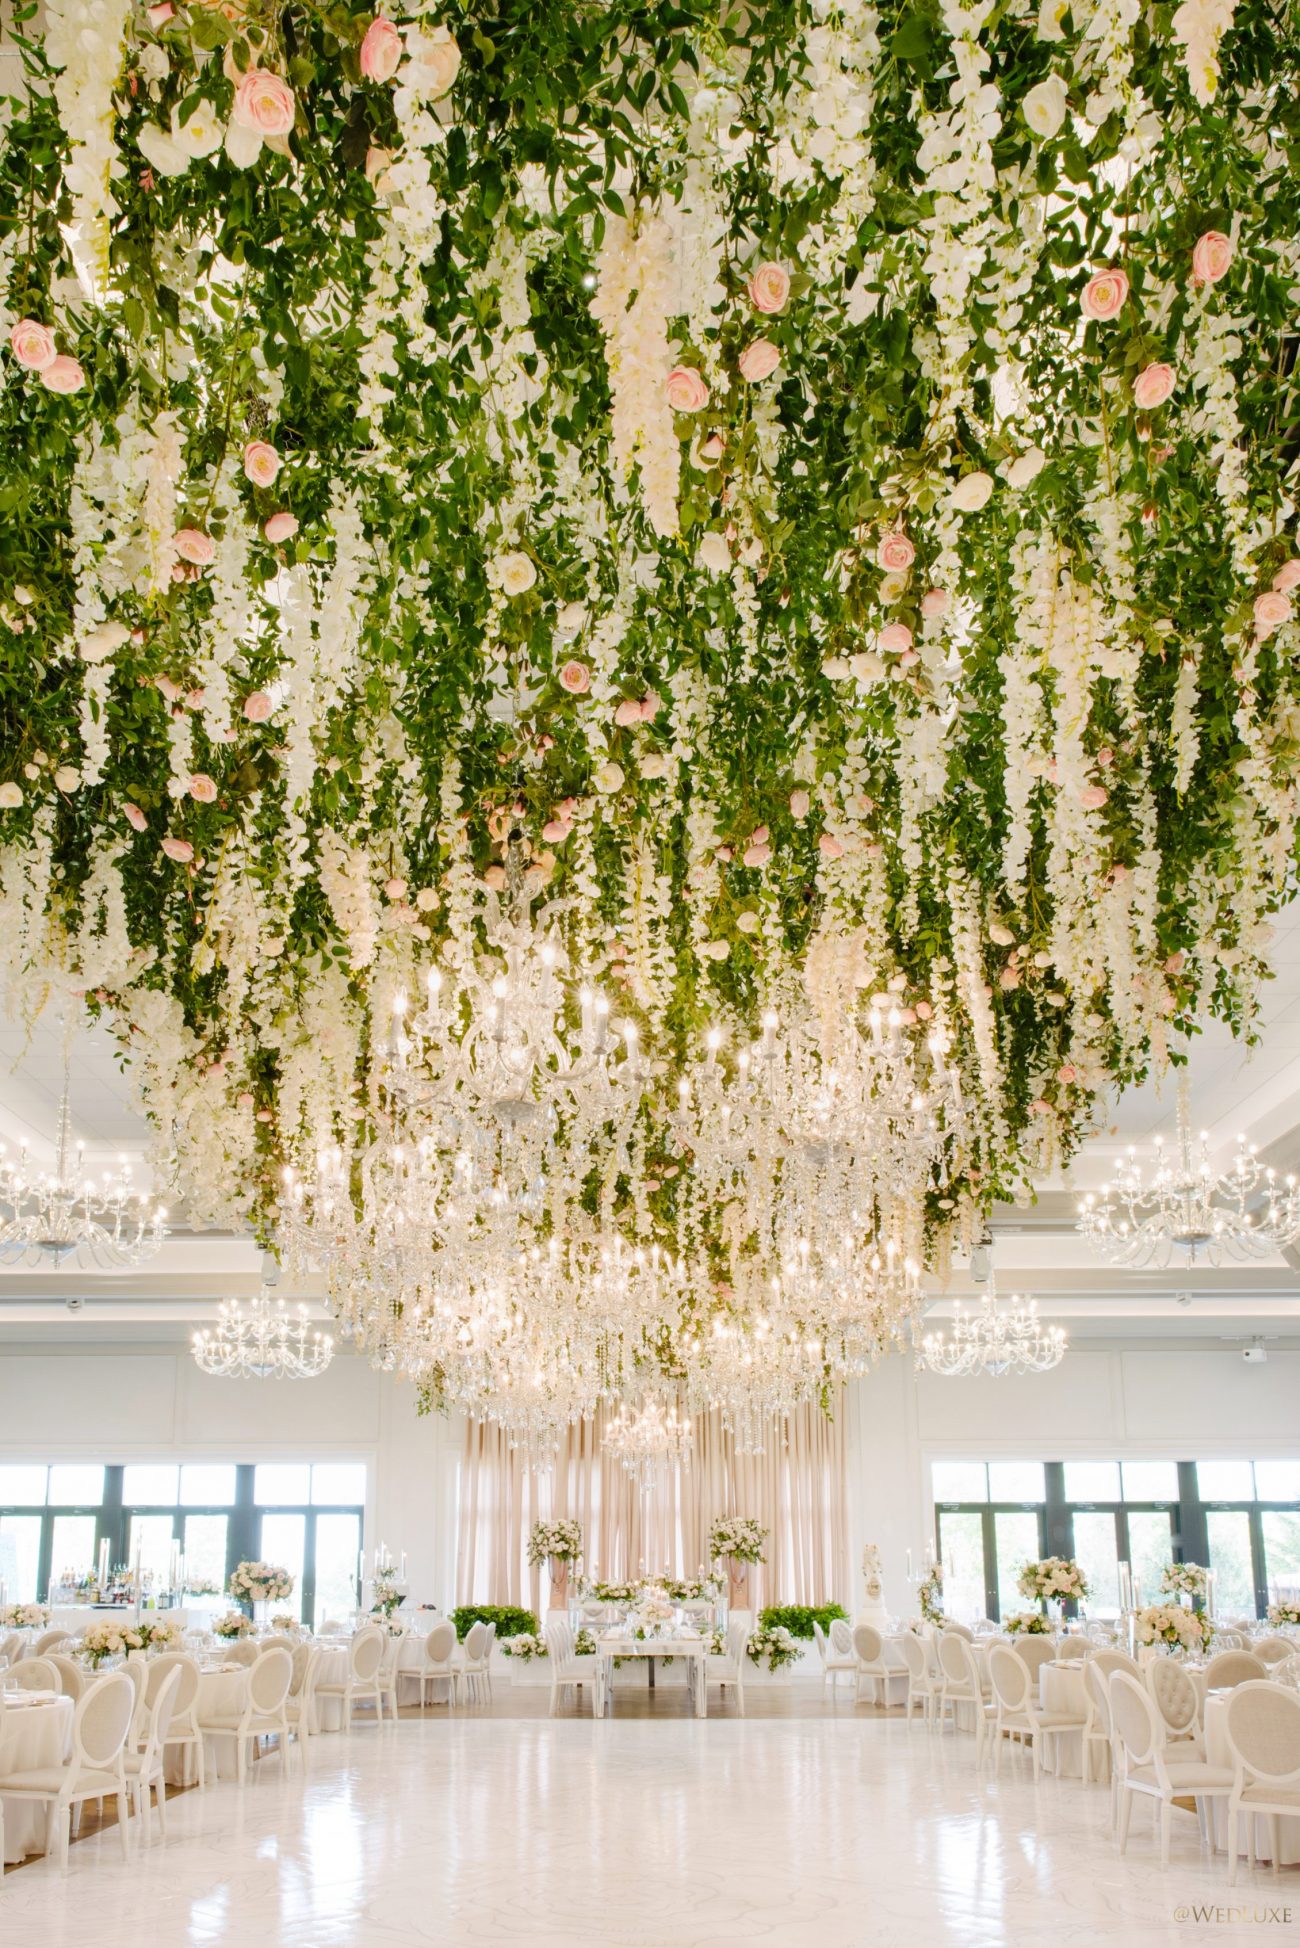 Pink roses, wisteria and vines hanging from the ceiling